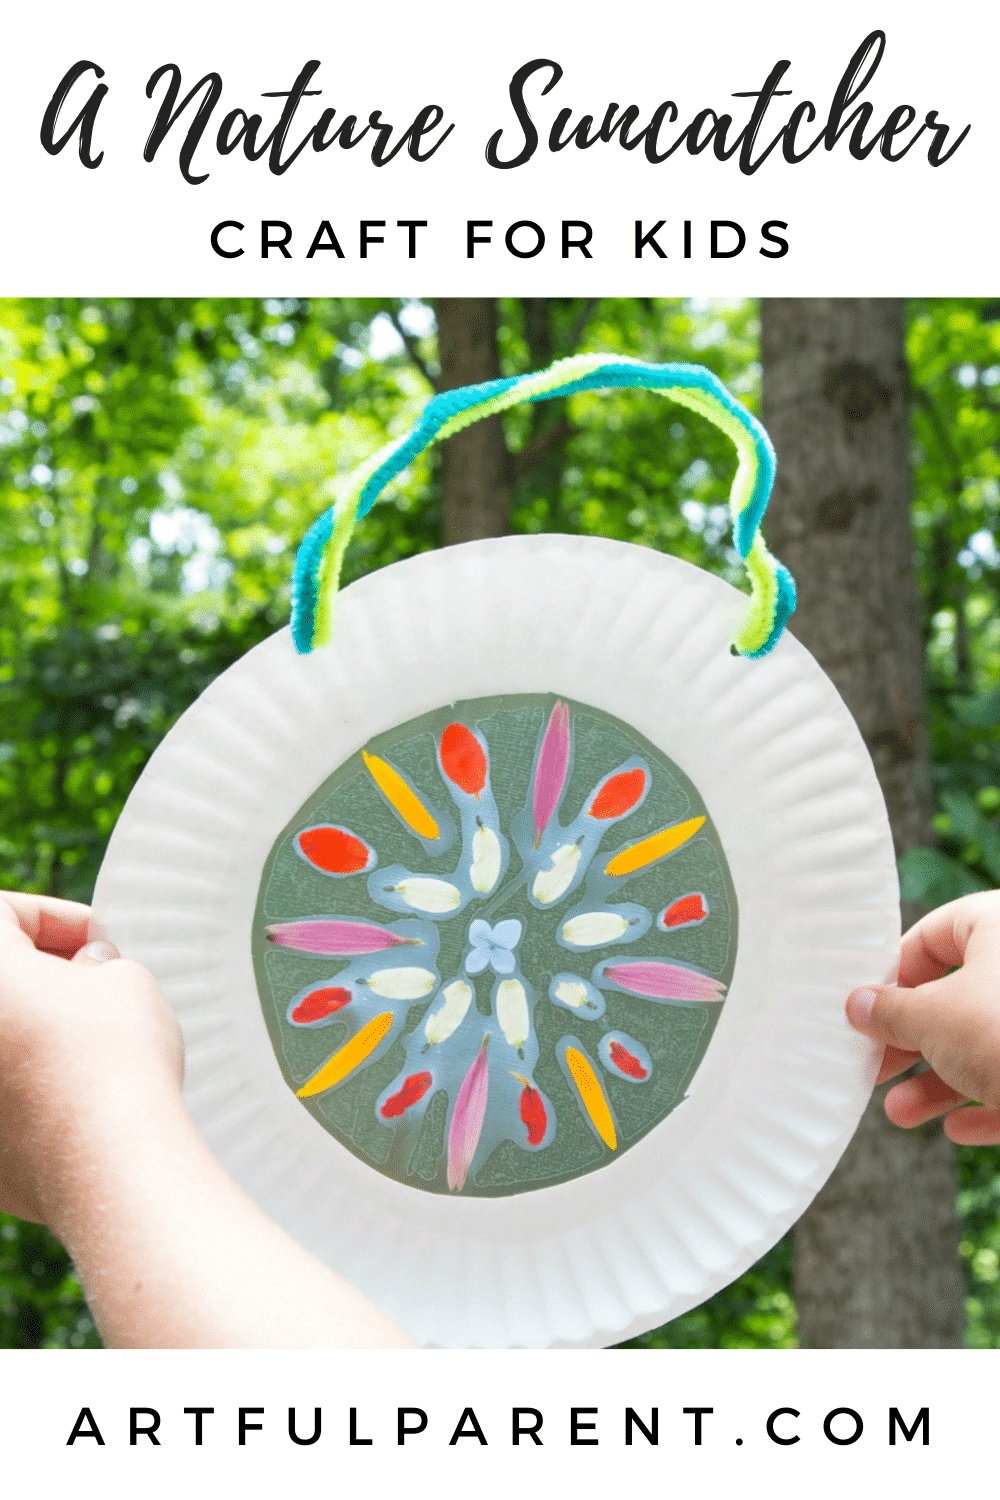 How to Make a Suncatcher with Paper Plates